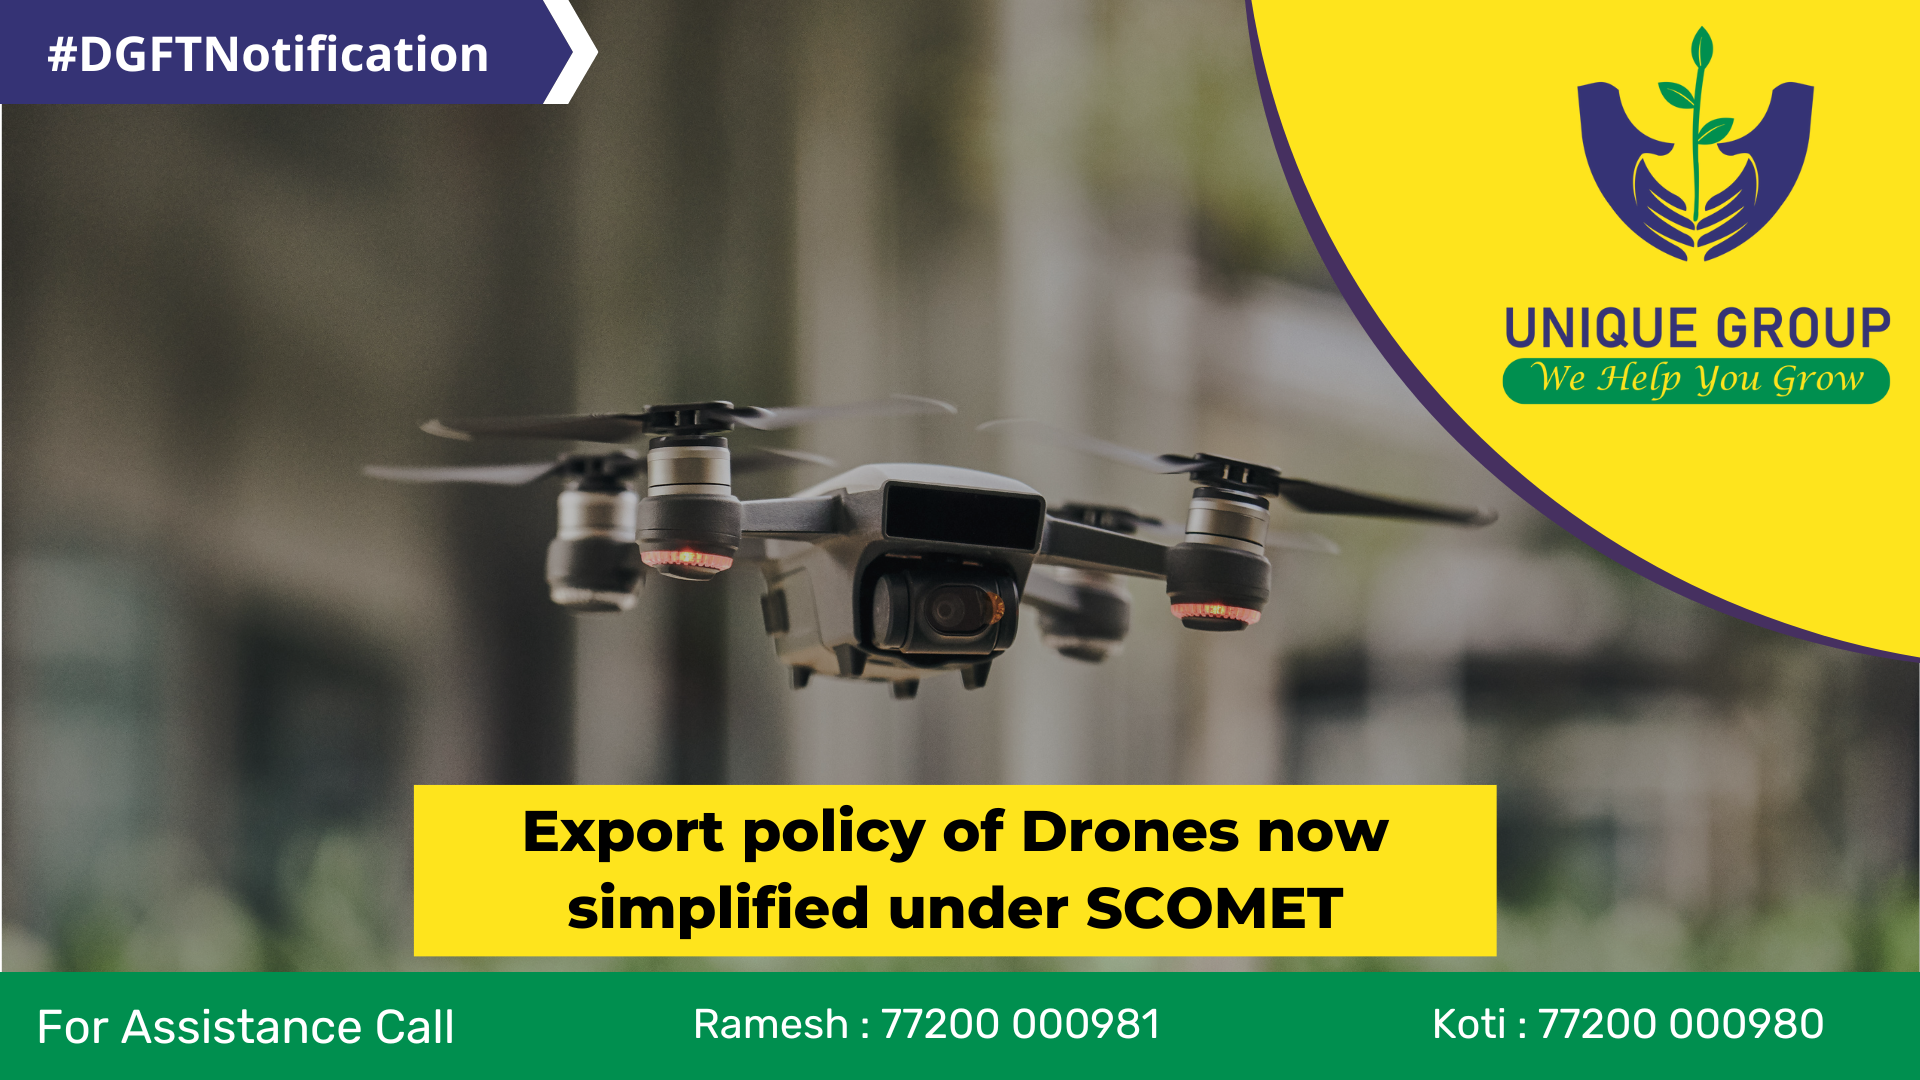 SCOMET Policy for export of drones/UAVs